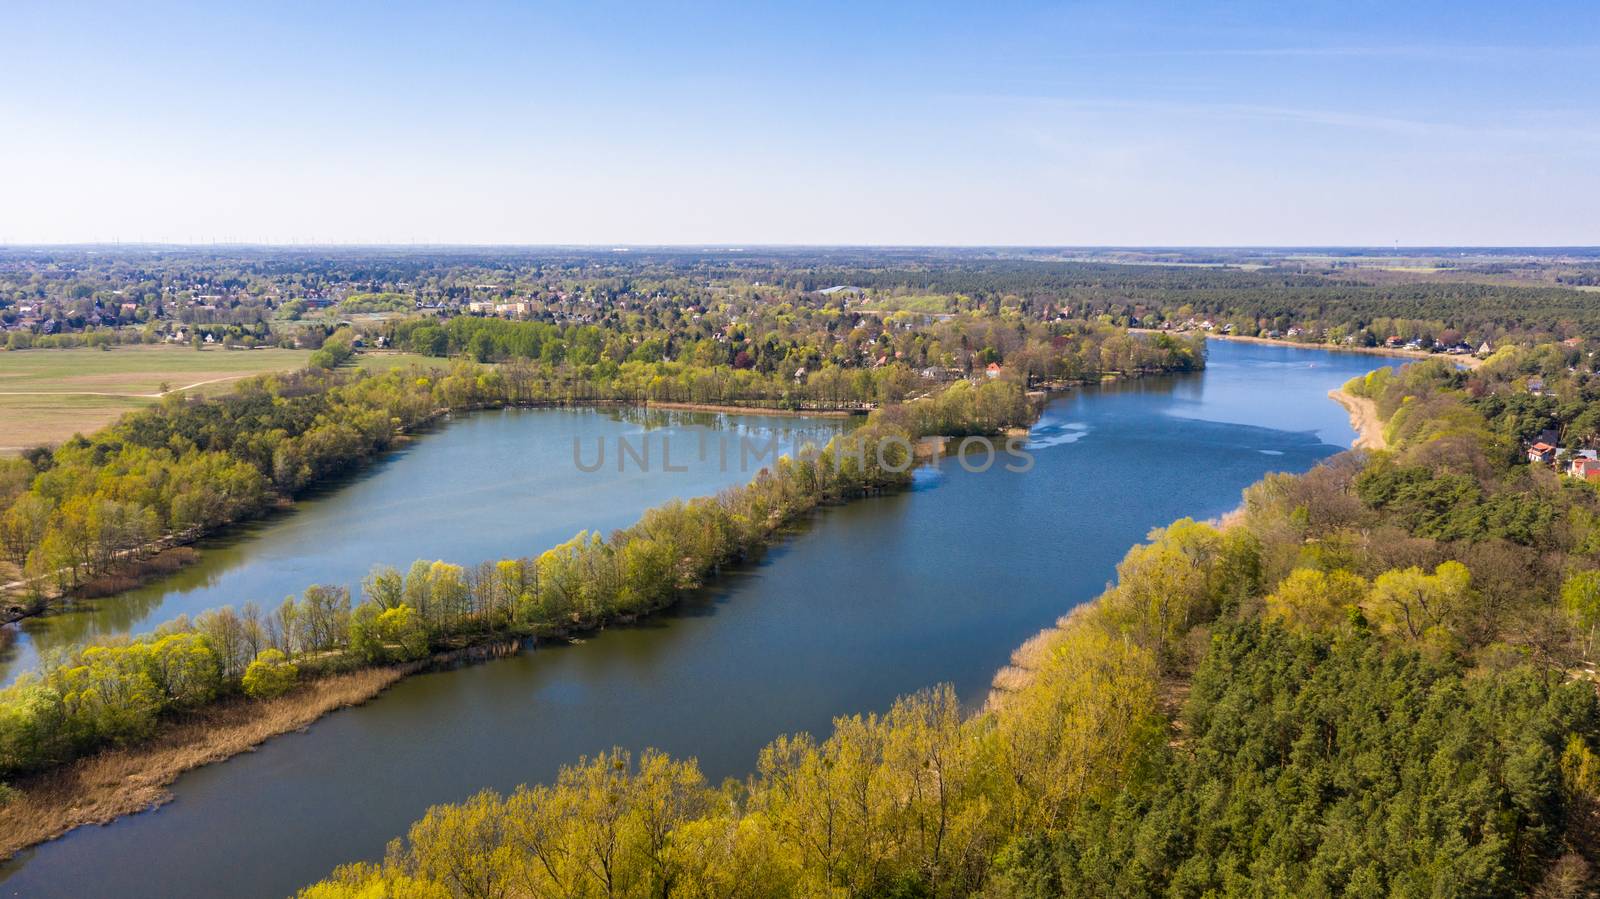 Falkensee, Brandenburg/Germany - 21.04.2019: The Falkenhagener See in Falkensee near Berlin with the Faulen See, two lakes in which bathing is not allowed and is located in a nature reserve.